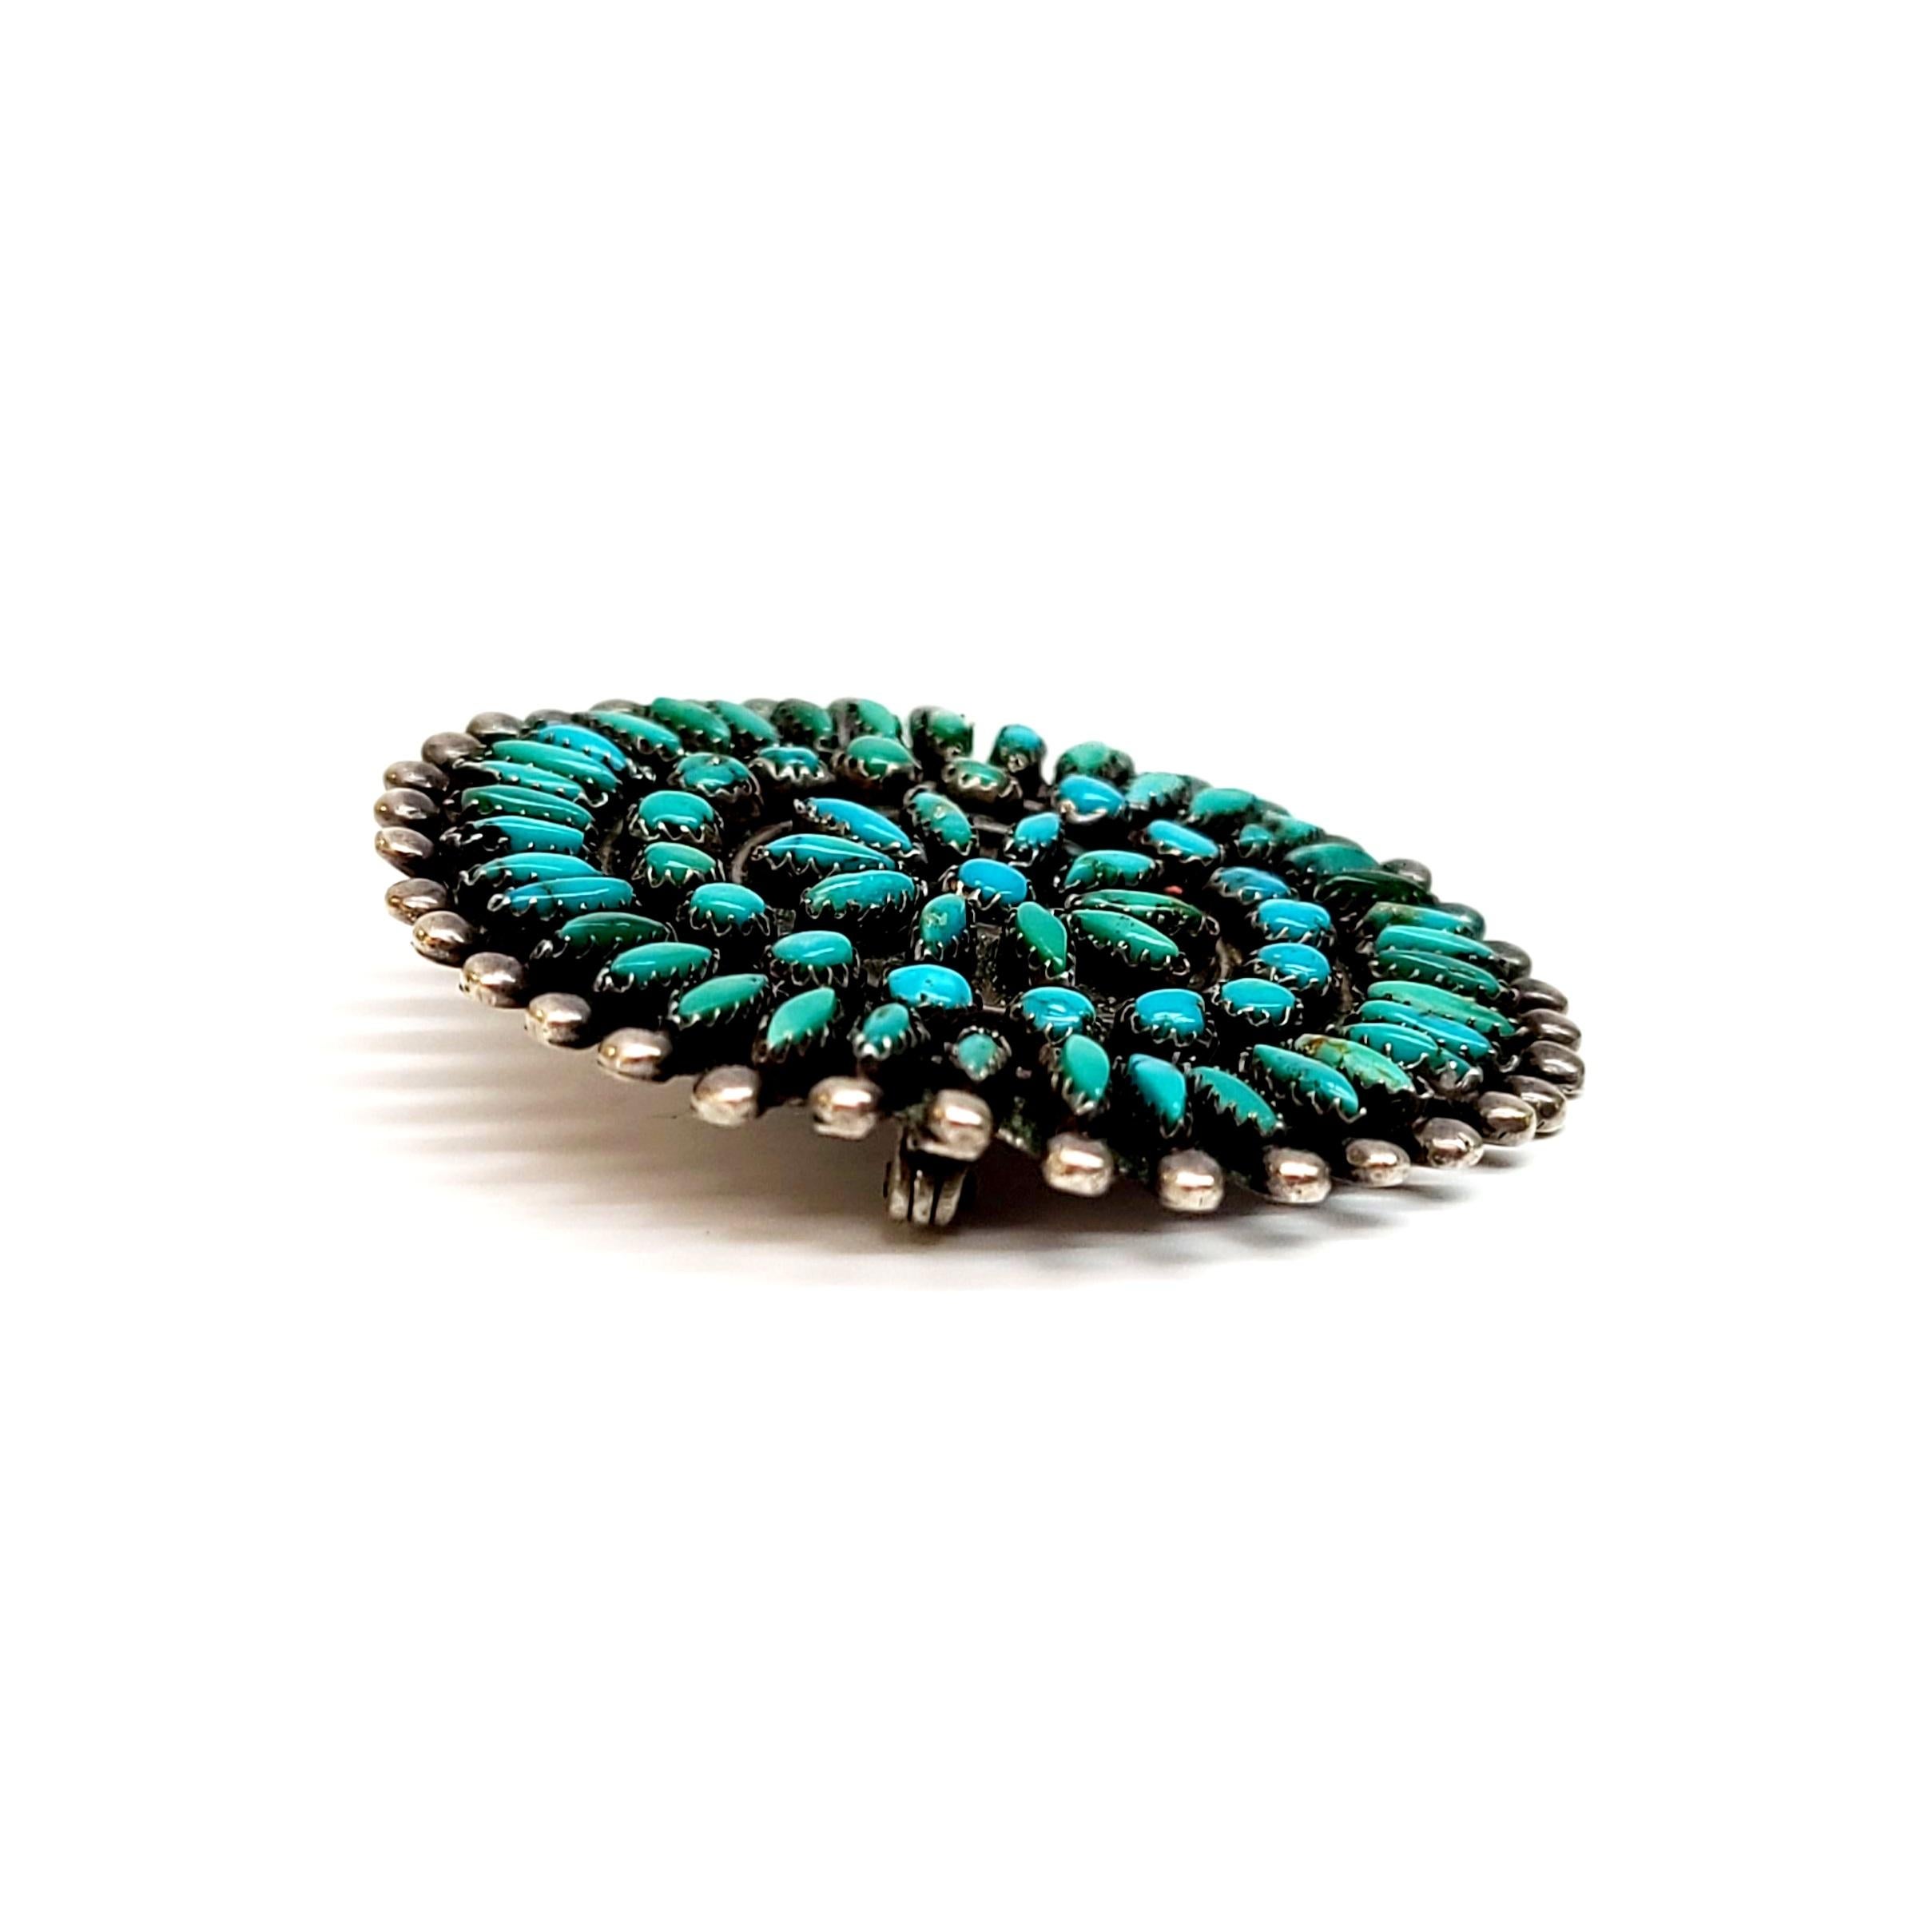 Silver and needlepoint stones round pin by a Native American artisan.

Needlepoint is a Zuni and Navajo technique featuring straight, long narrow stones pointed on each side. This piece is done in a starburst design with silver beaded edge